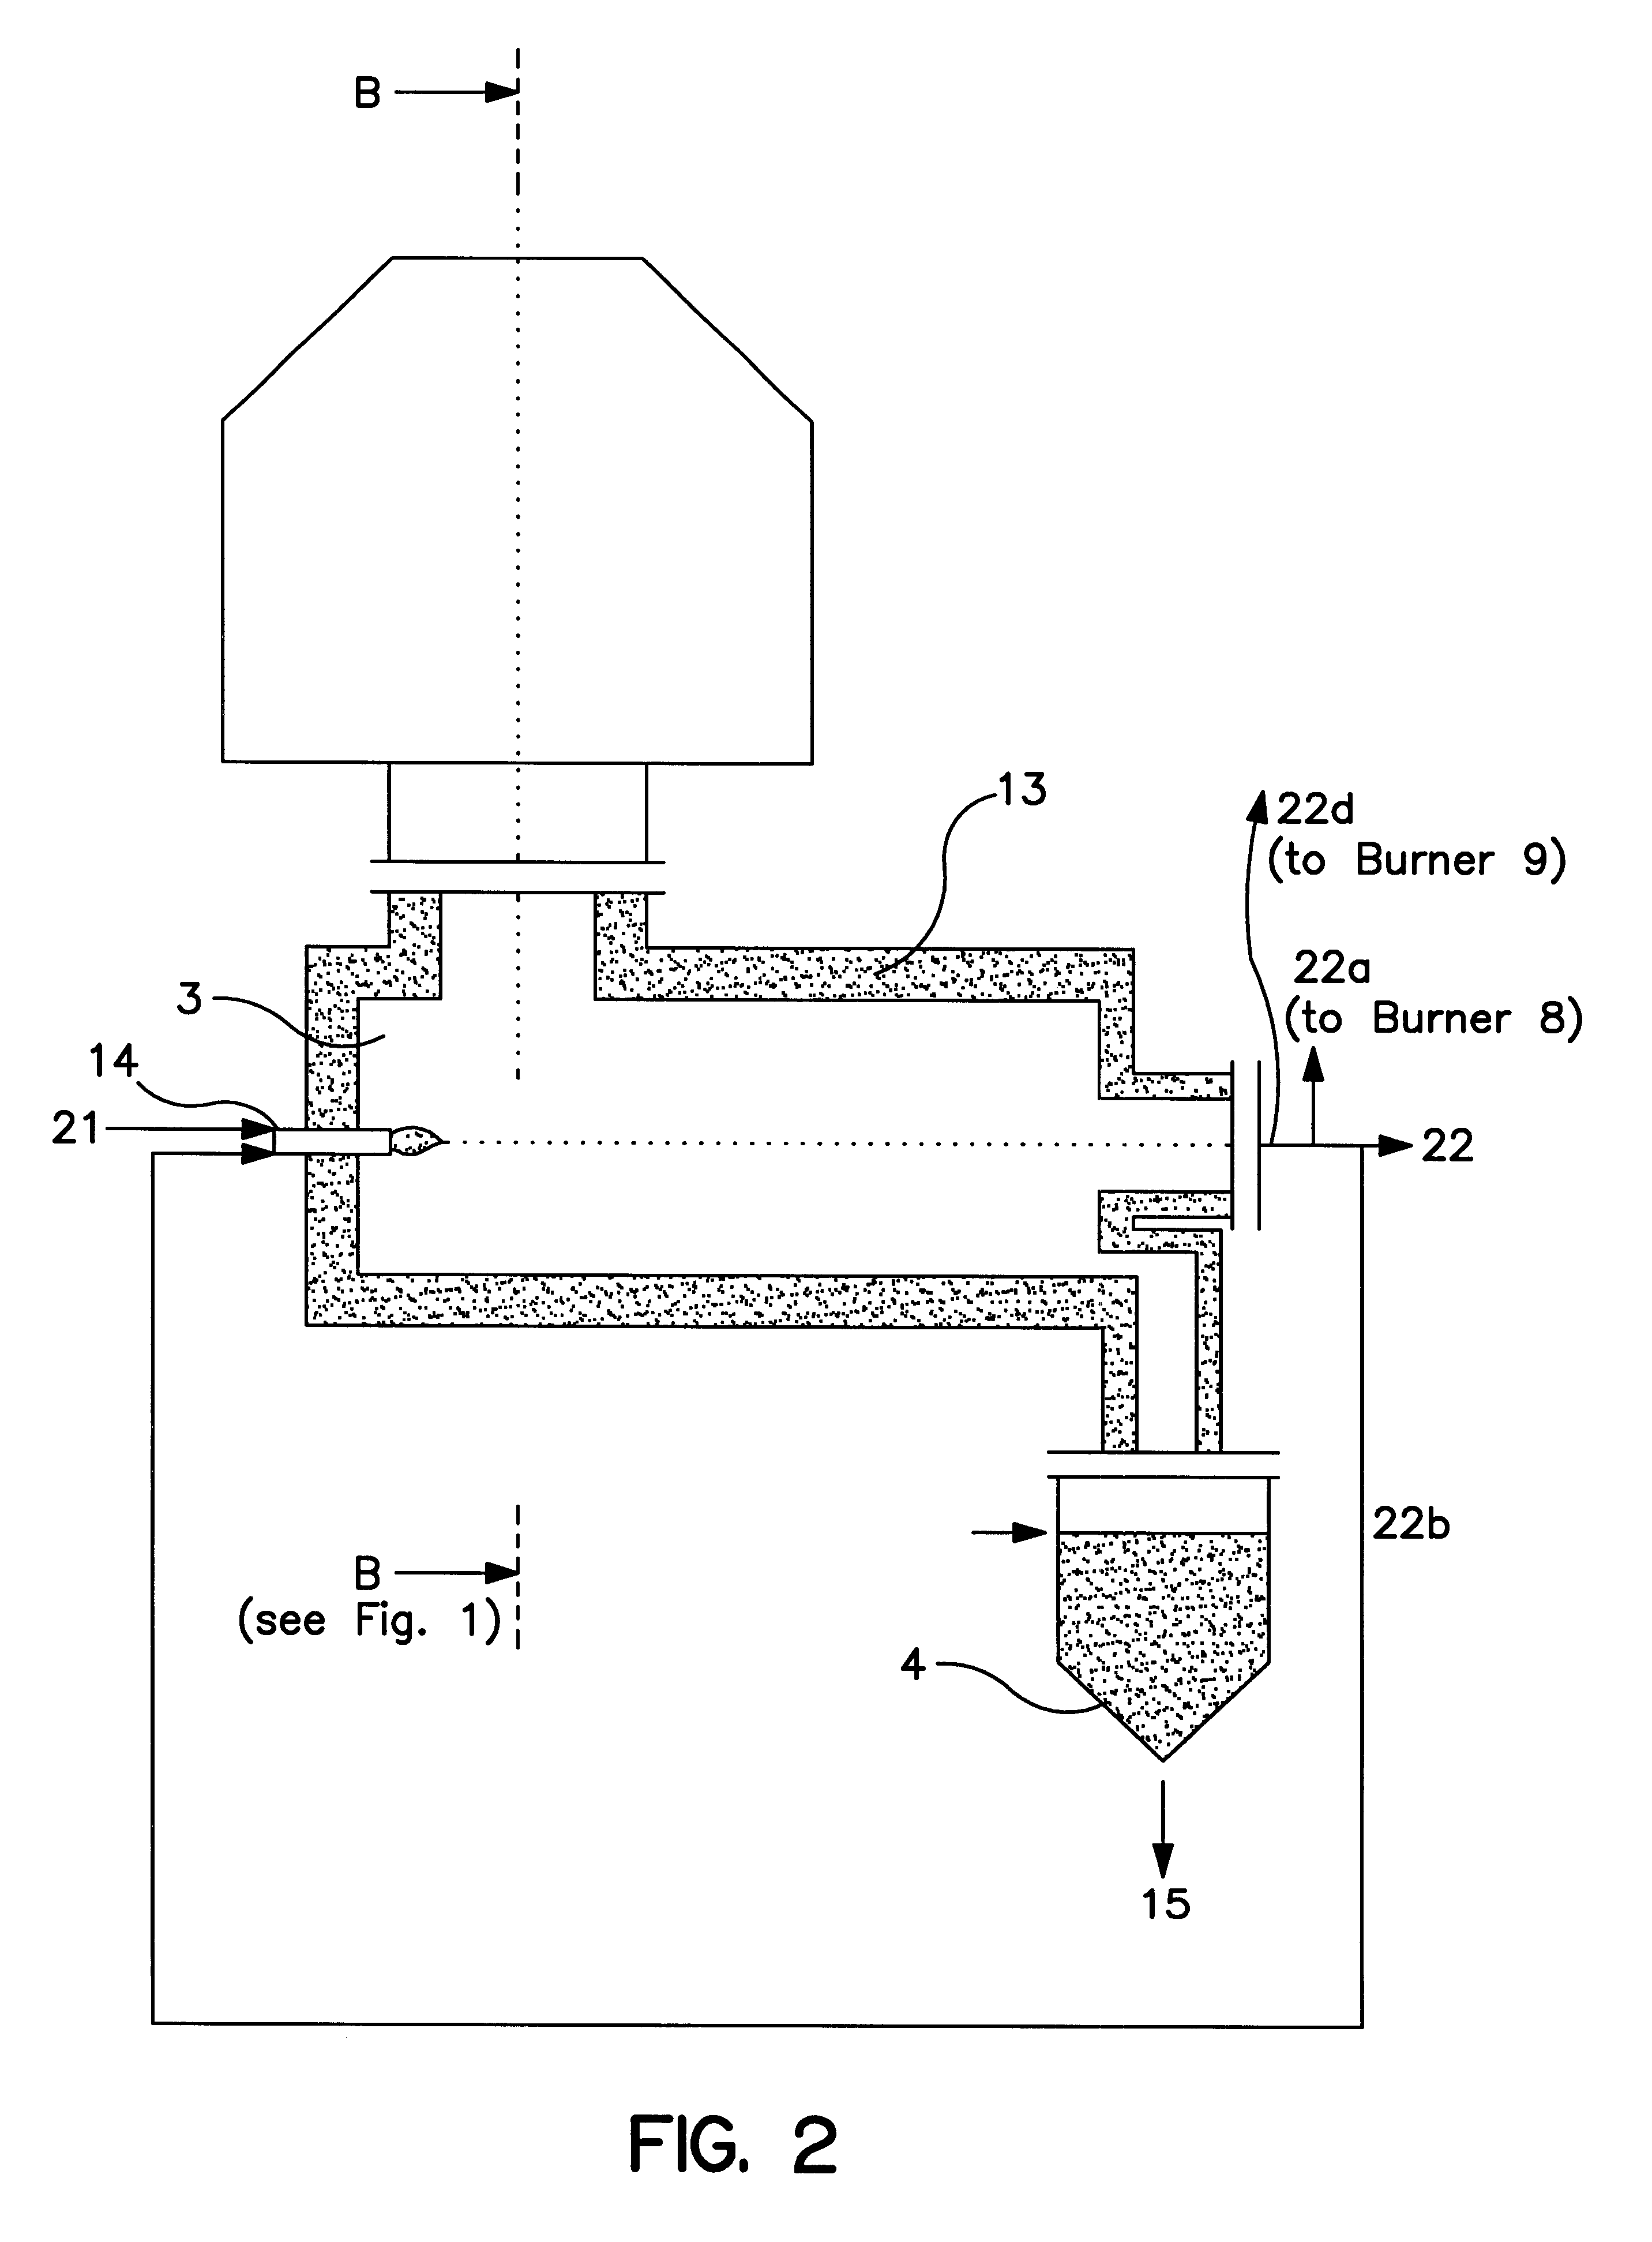 Process and device for gasification of waste